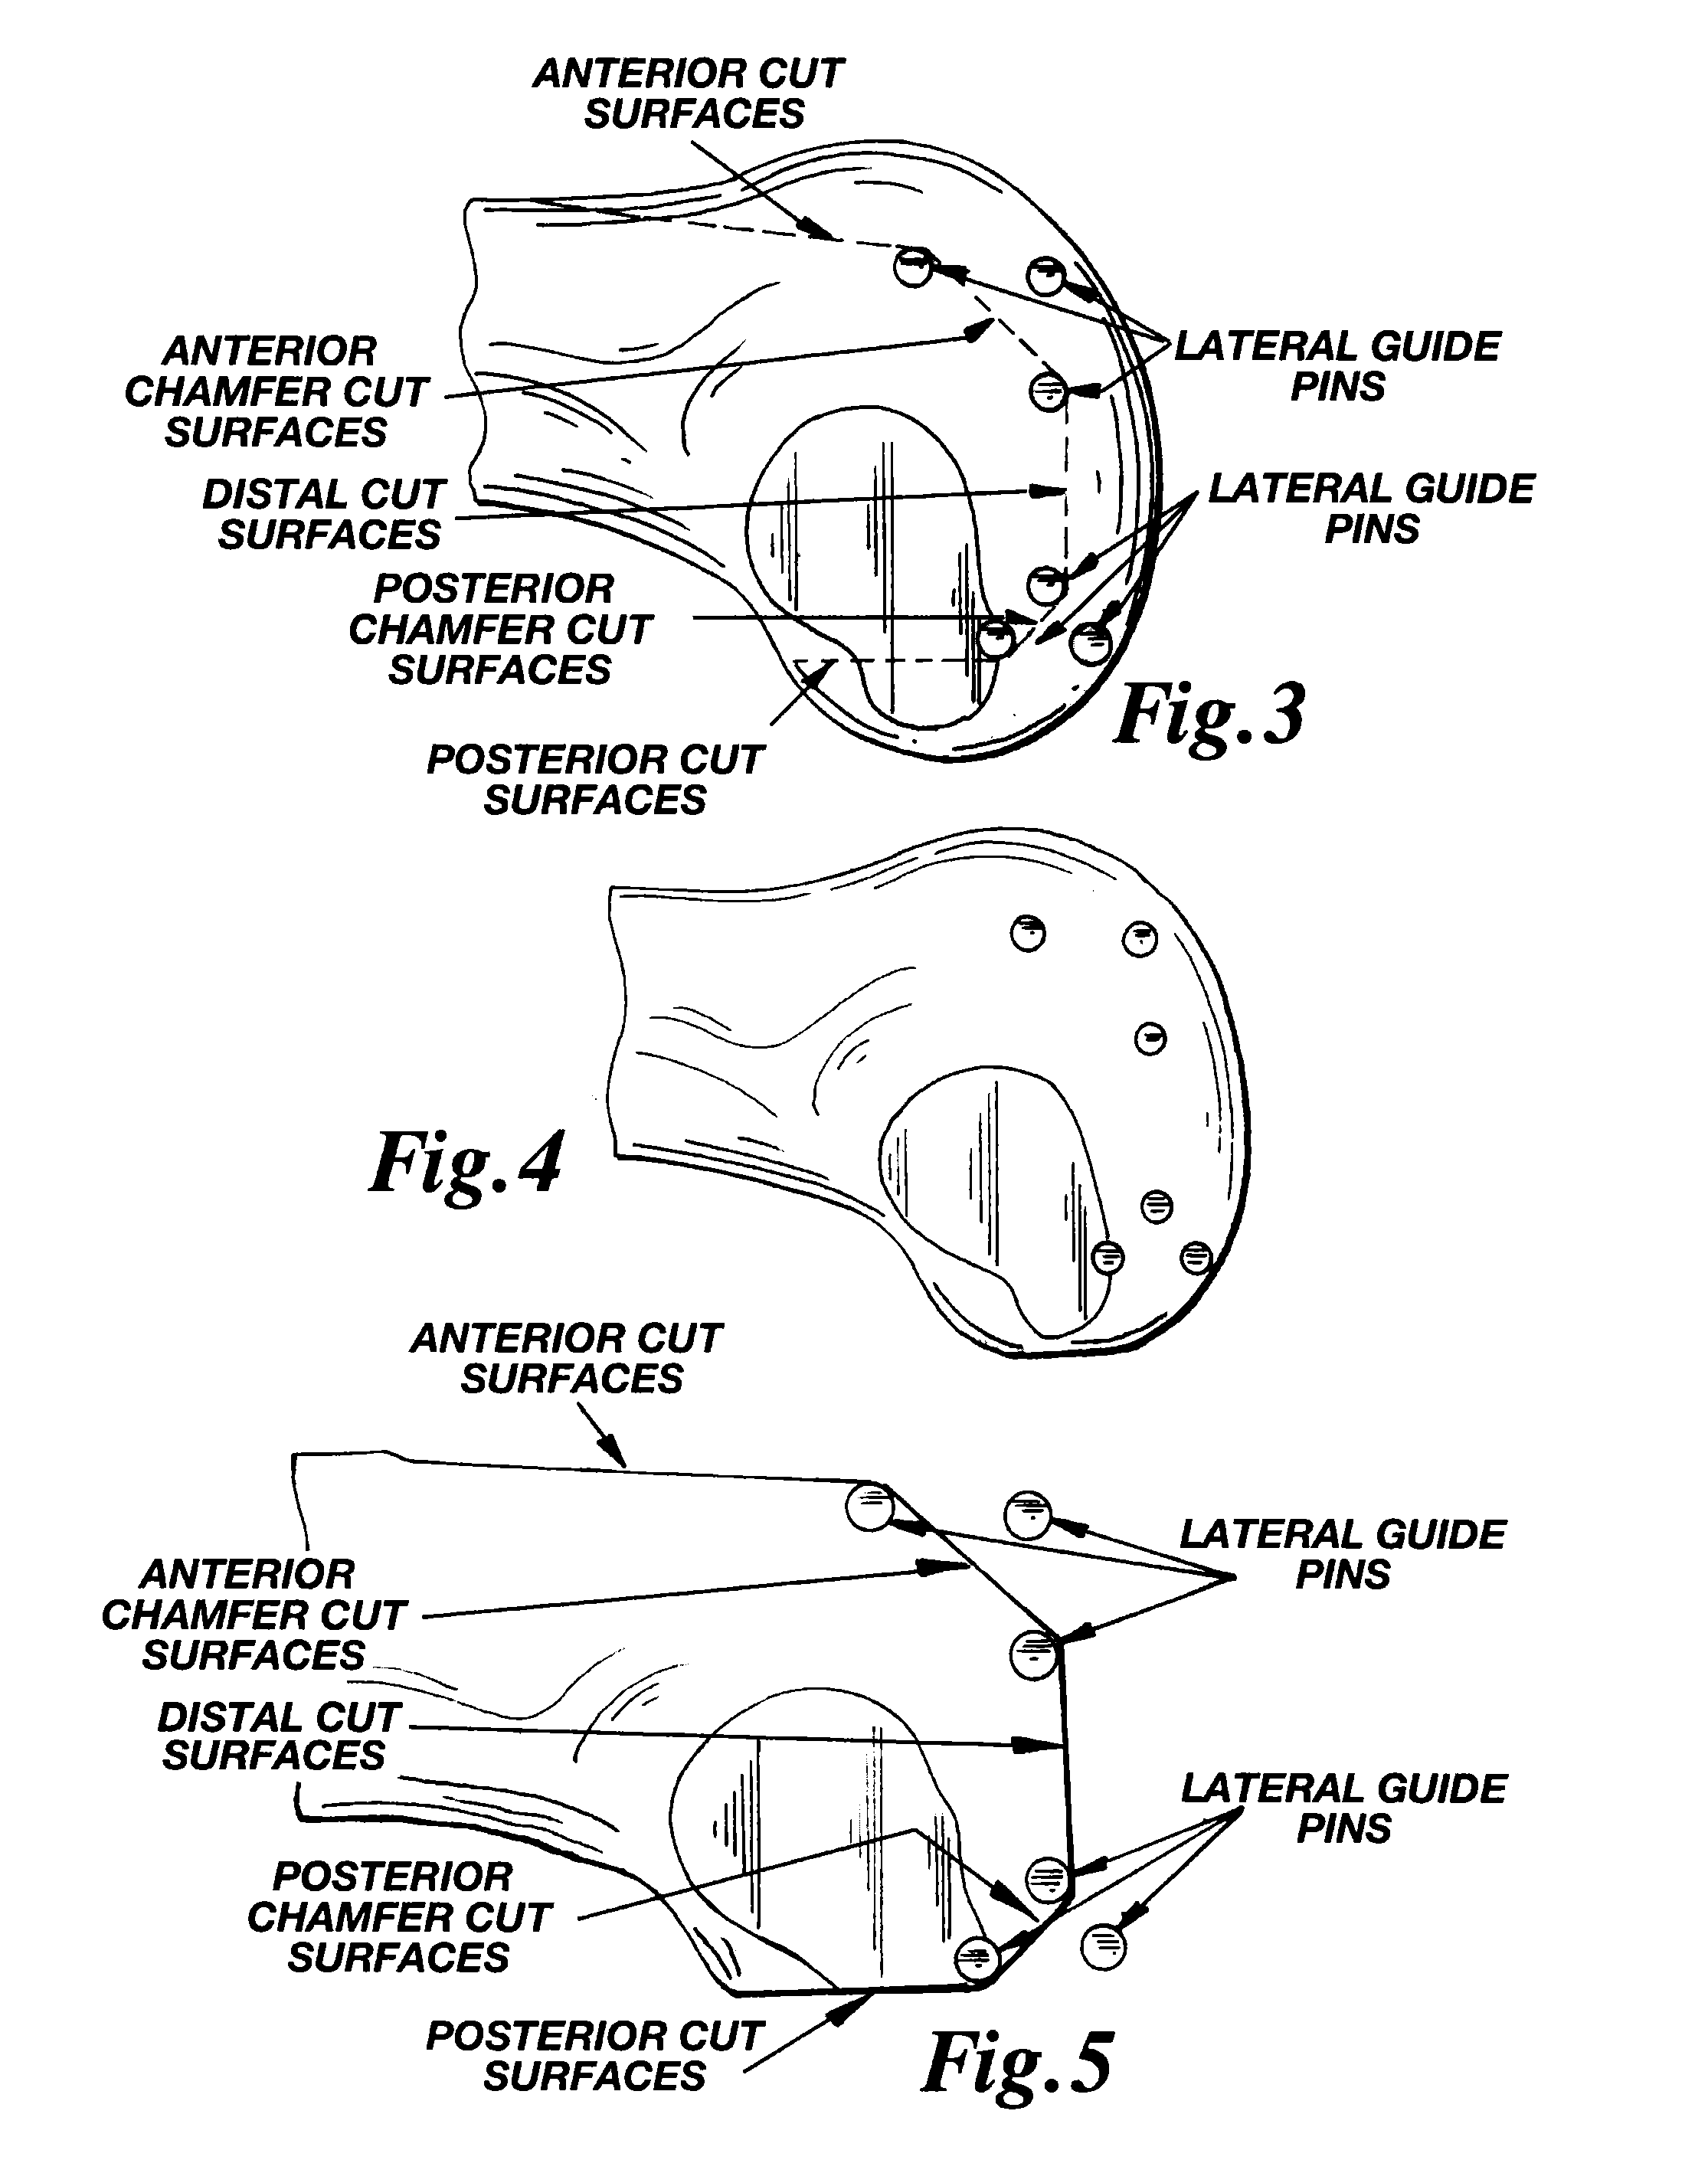 Methods and apparatus for pinplasty bone resection